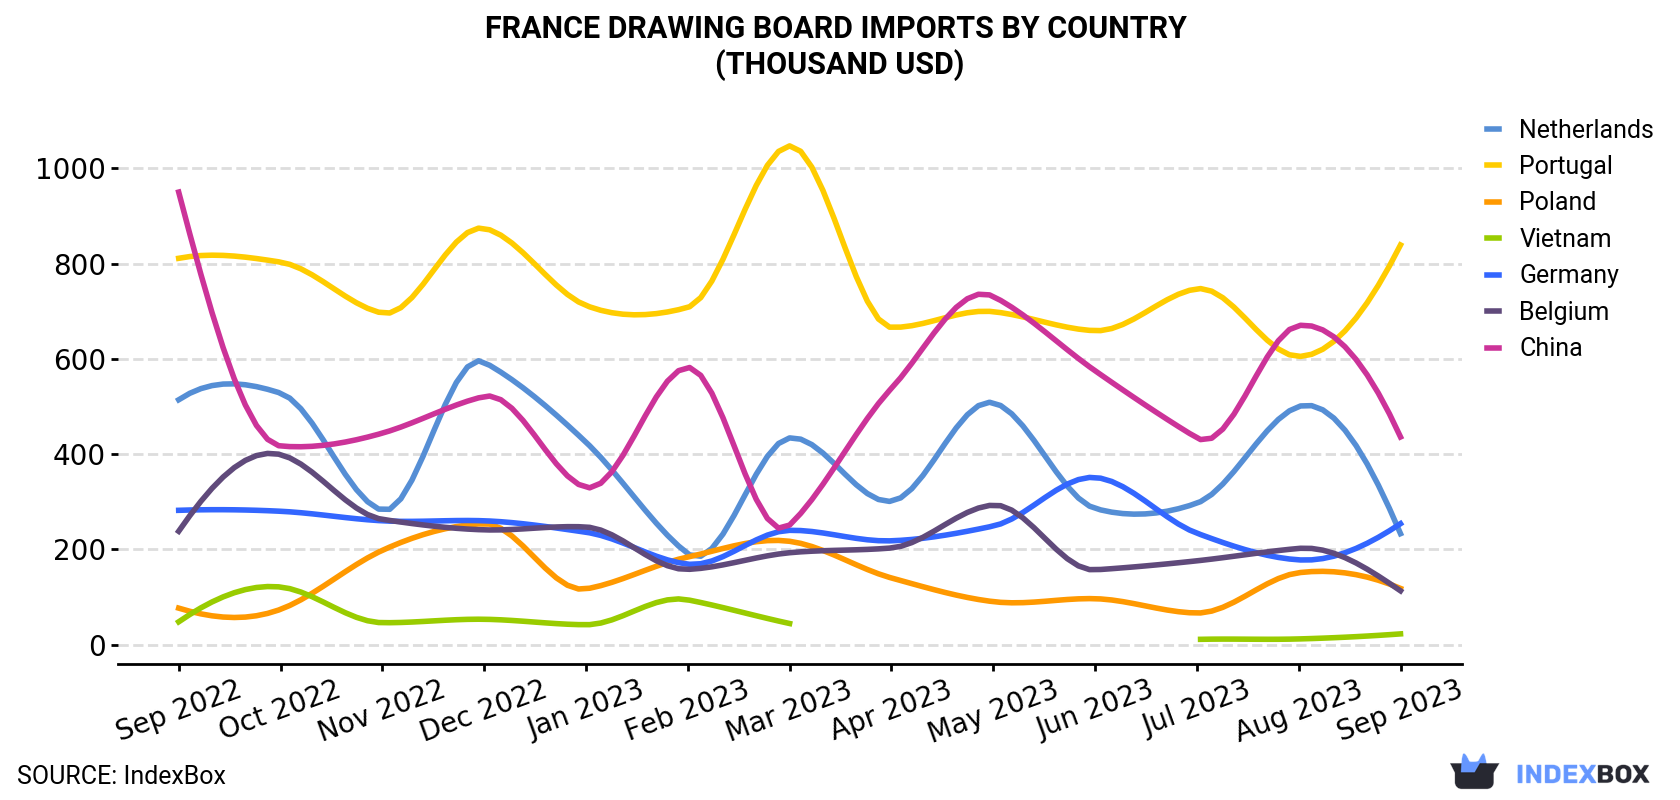 France Drawing Board Imports By Country (Thousand USD)